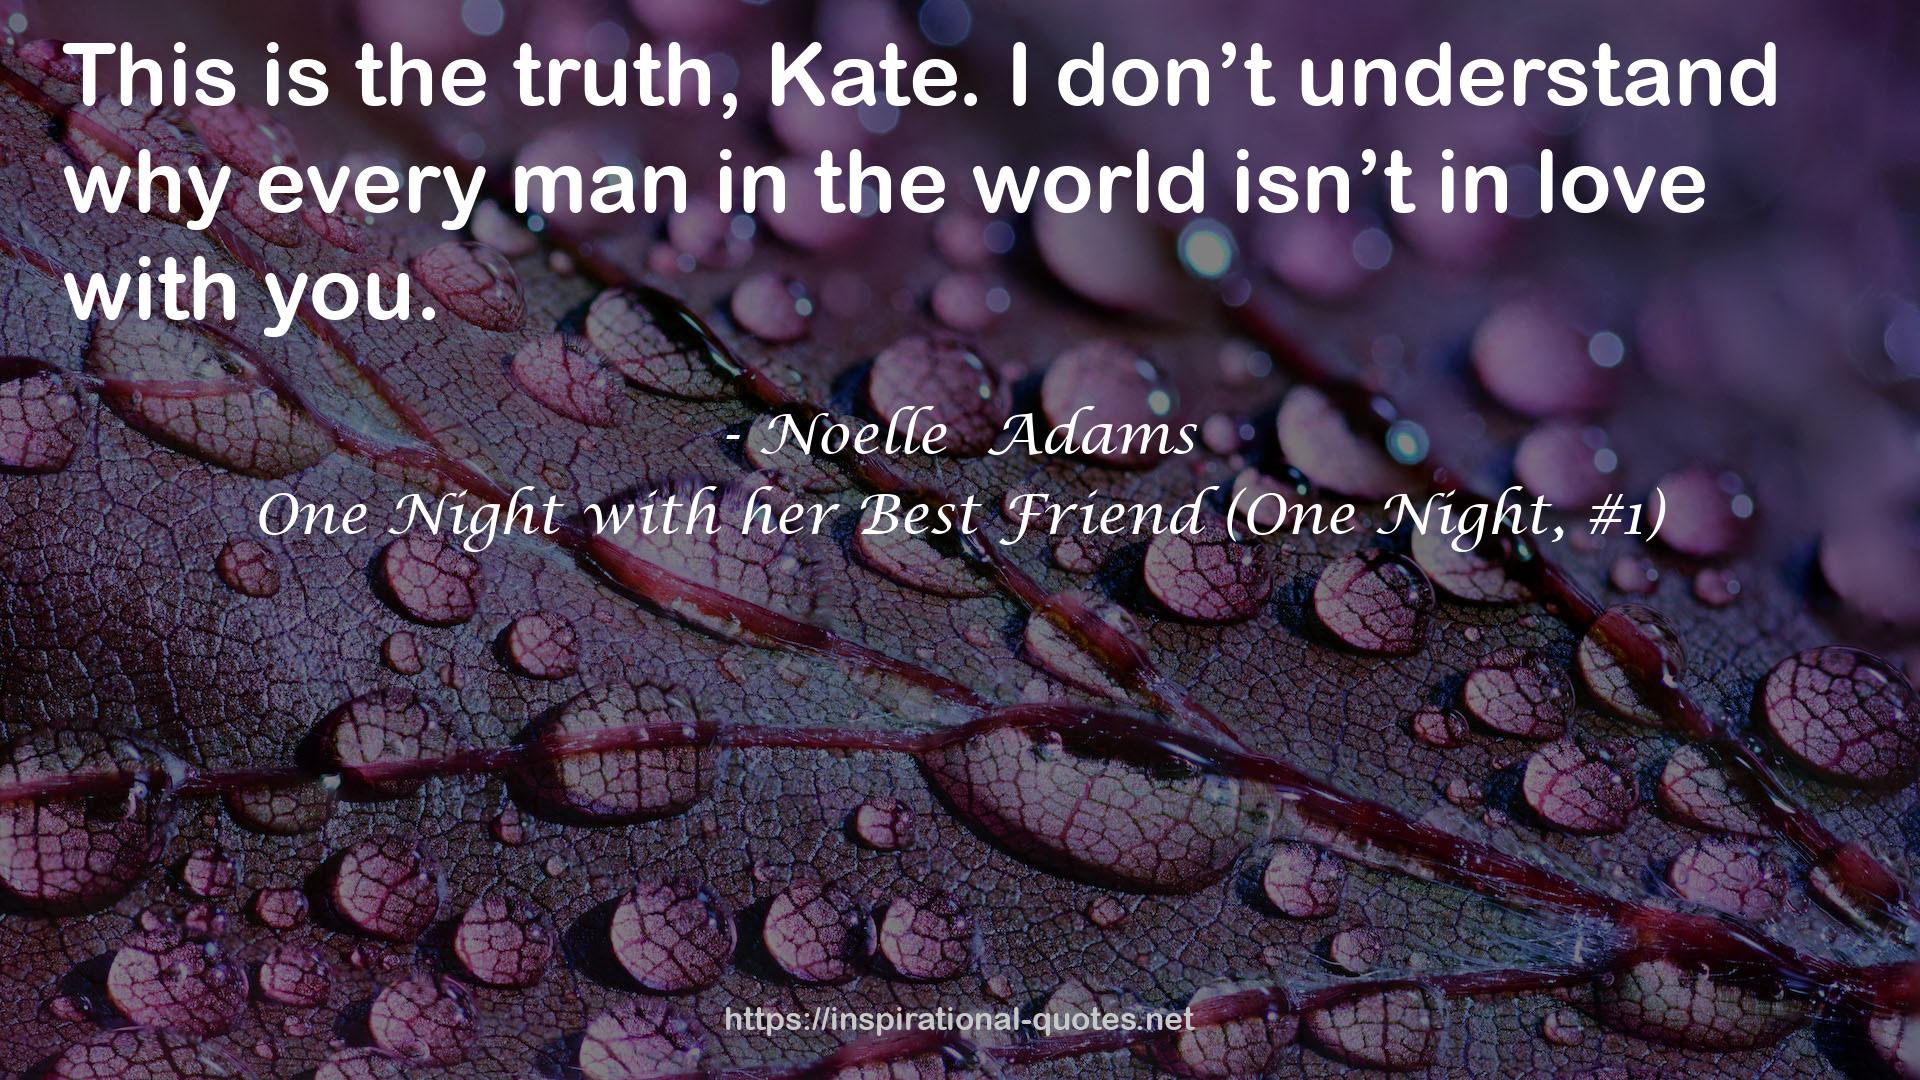 One Night with her Best Friend (One Night, #1) QUOTES